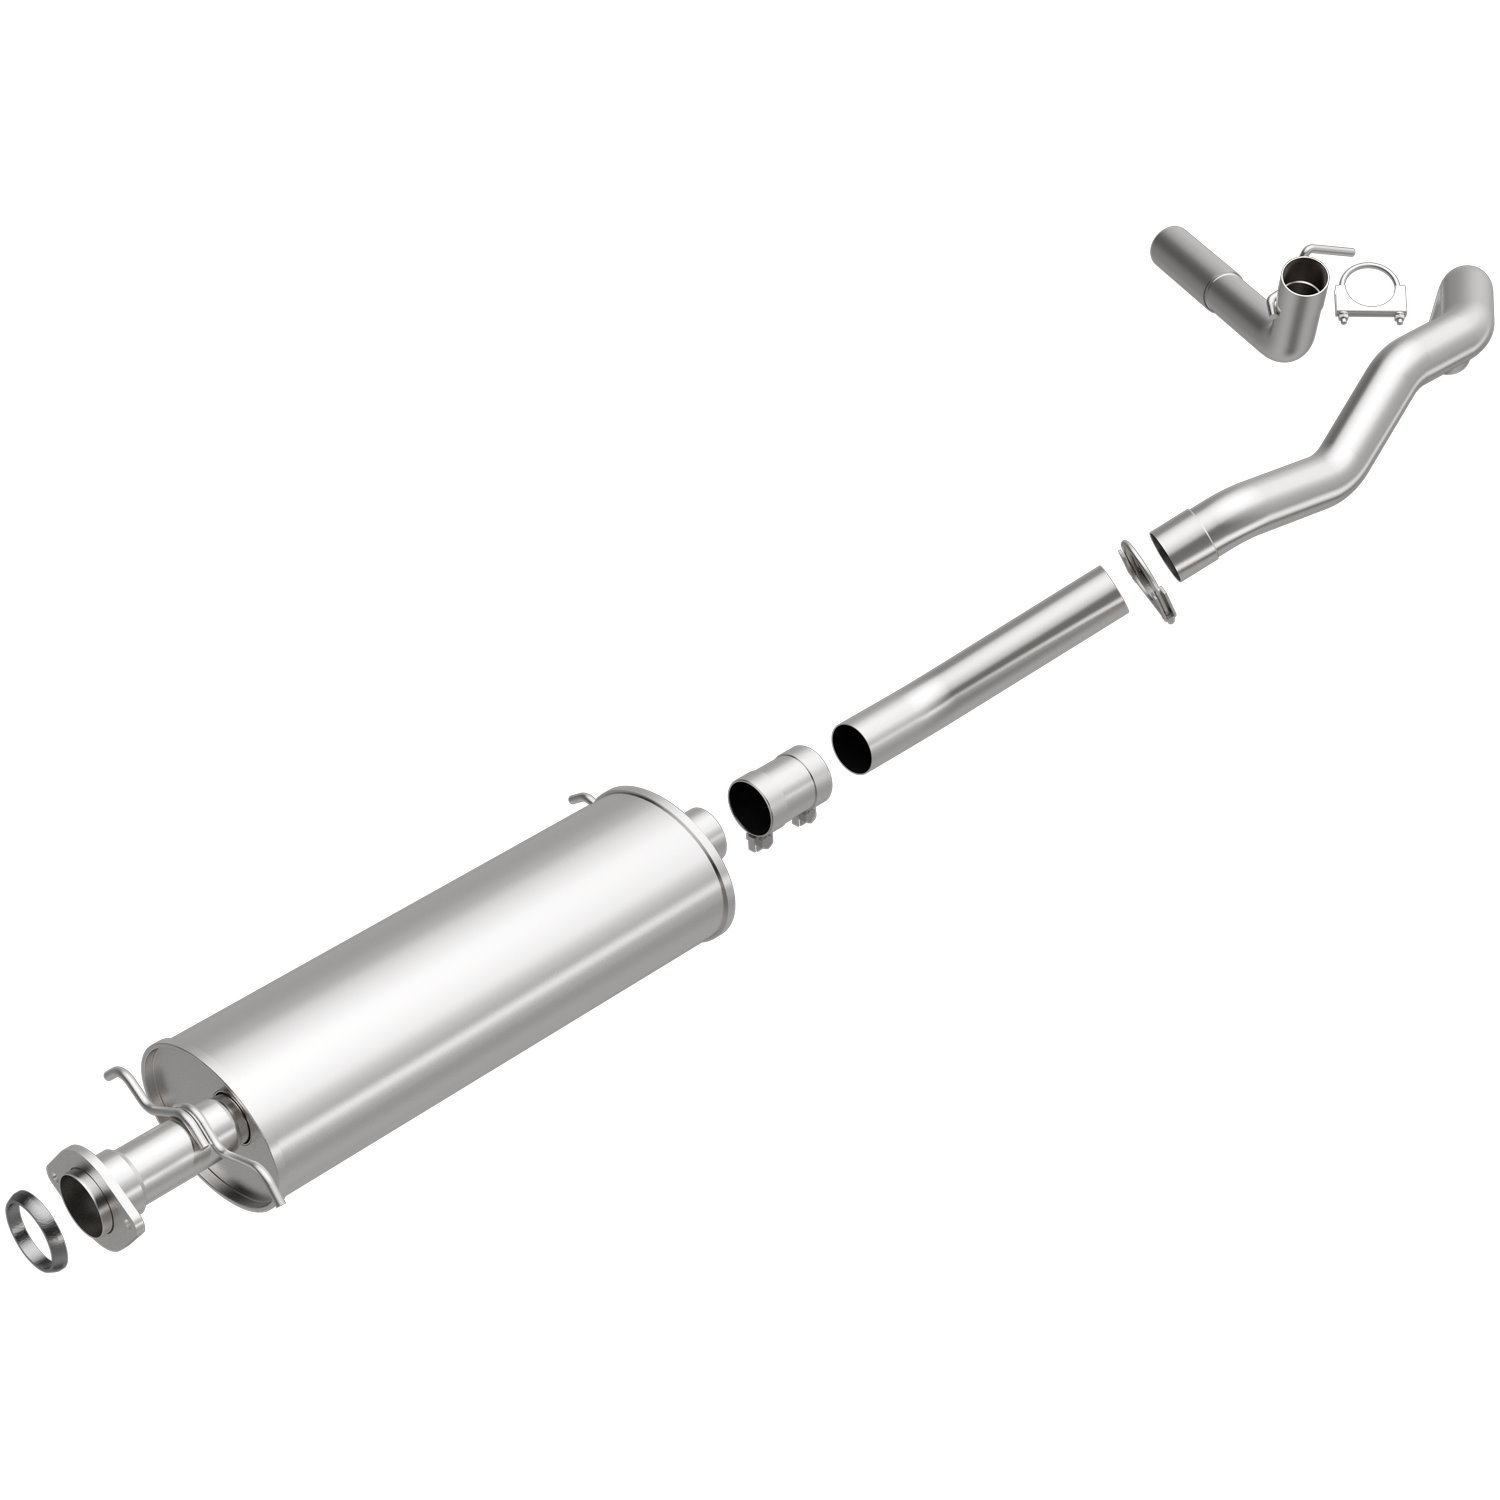 Direct-Fit Exhaust Kit, 2007-2014 Ford Expedition, Lincoln Navigator 5.4L